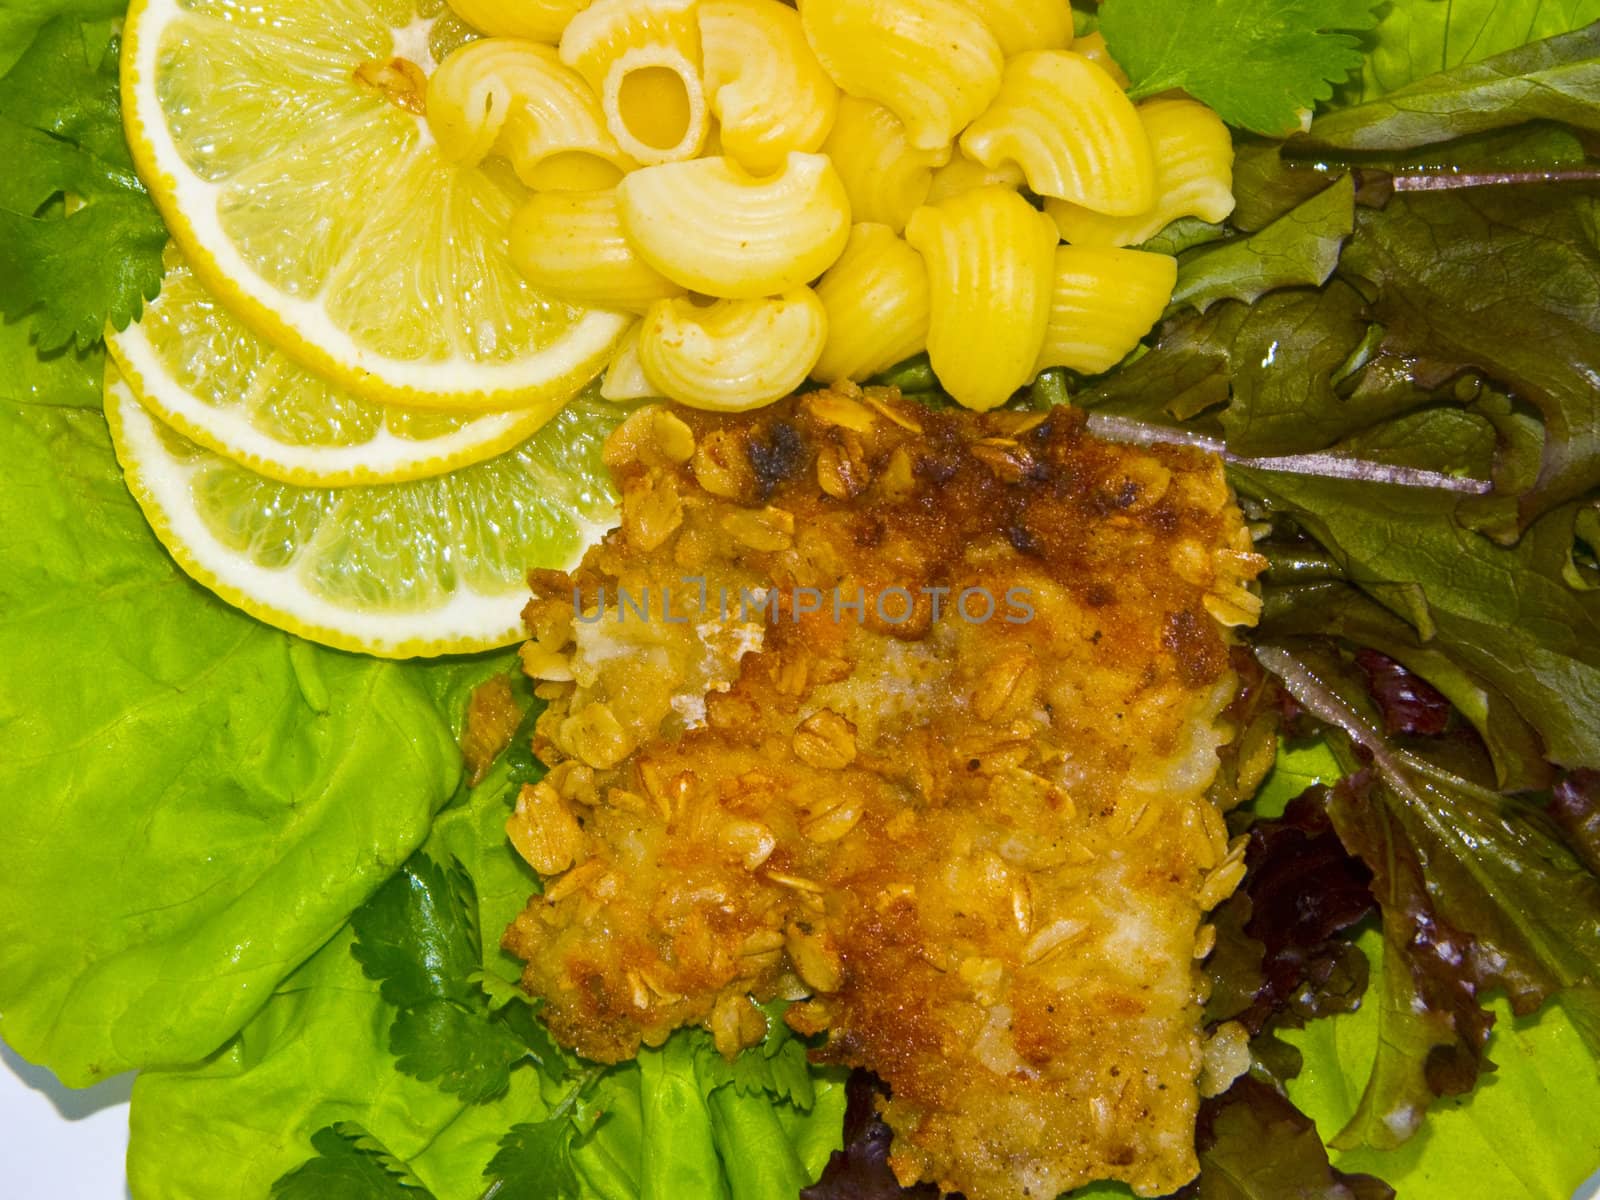 The image of macaroni, of a fish and slices of a lemon close up